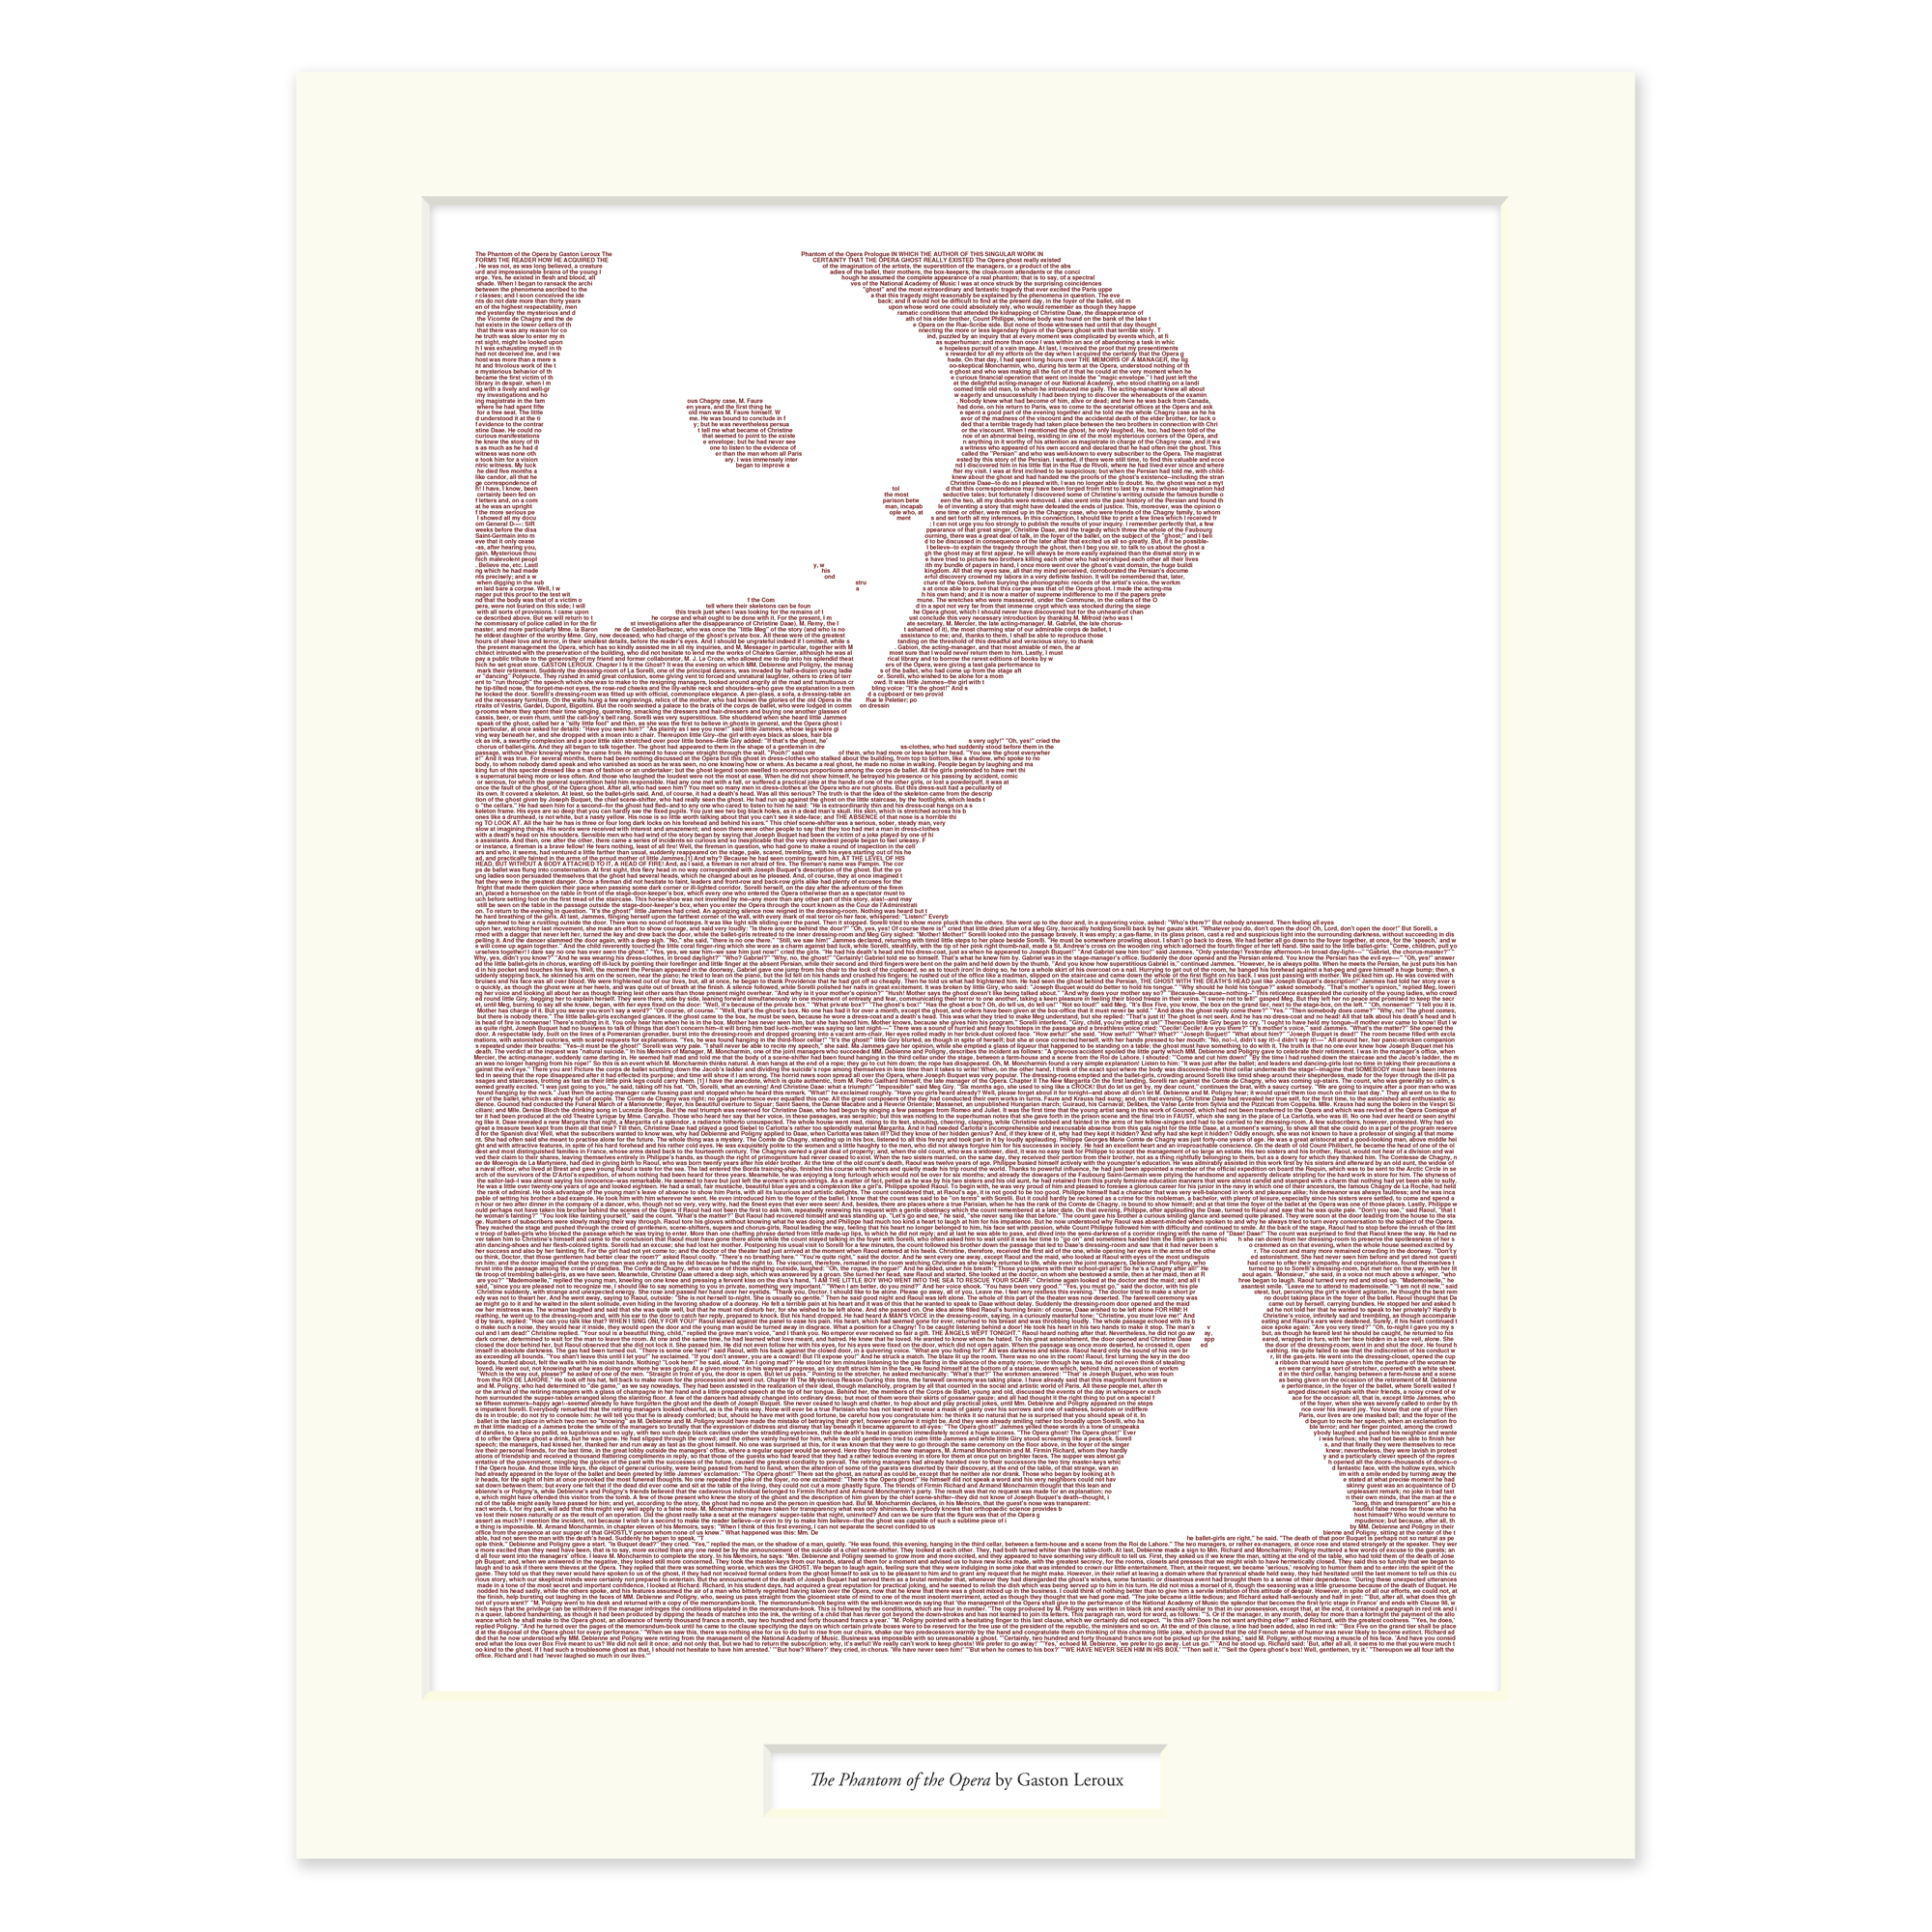 Created from the text of The Phantom of the Opera